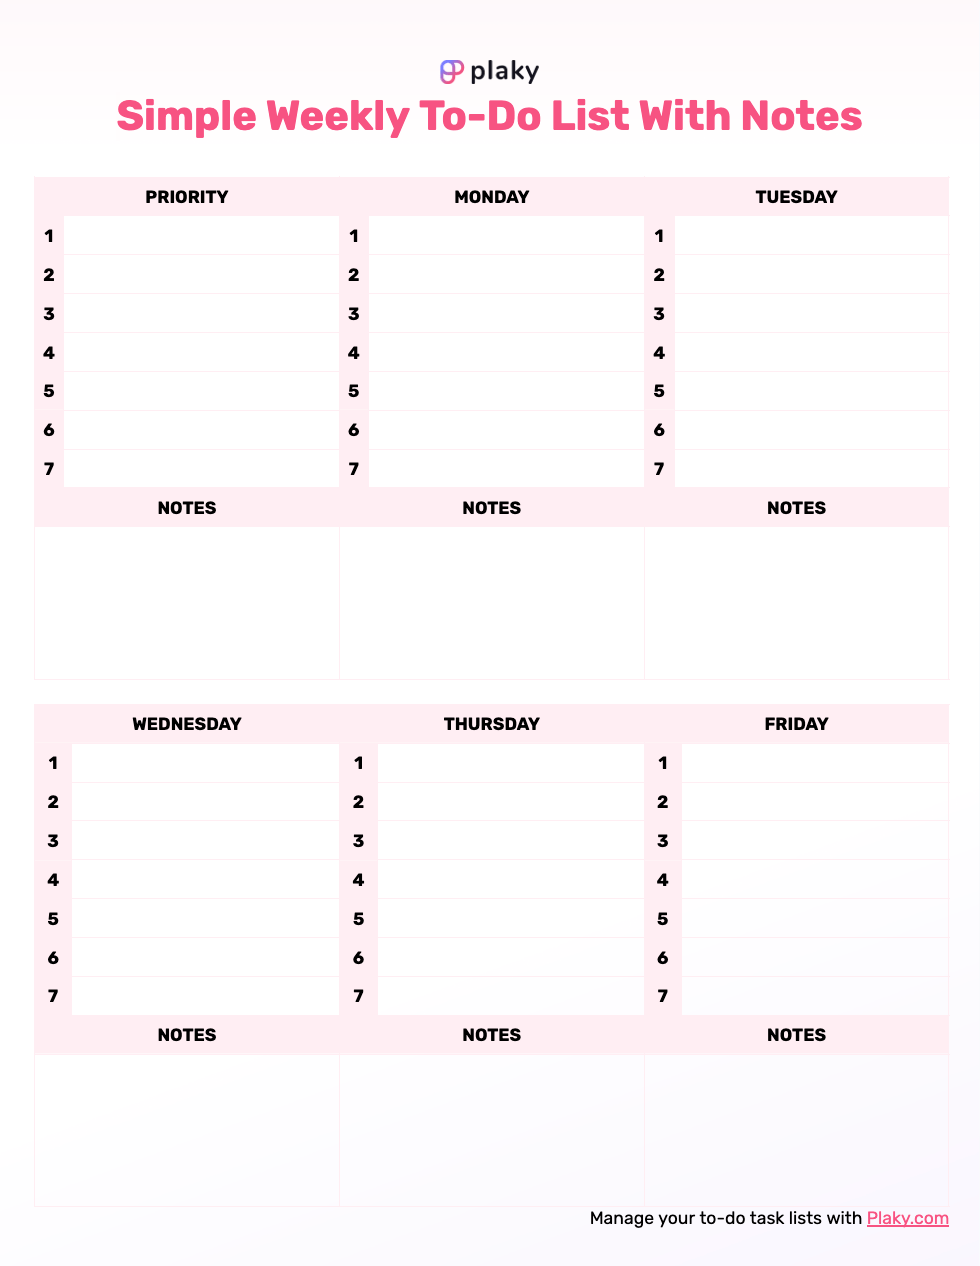 Simple weekly to-do list template with notes